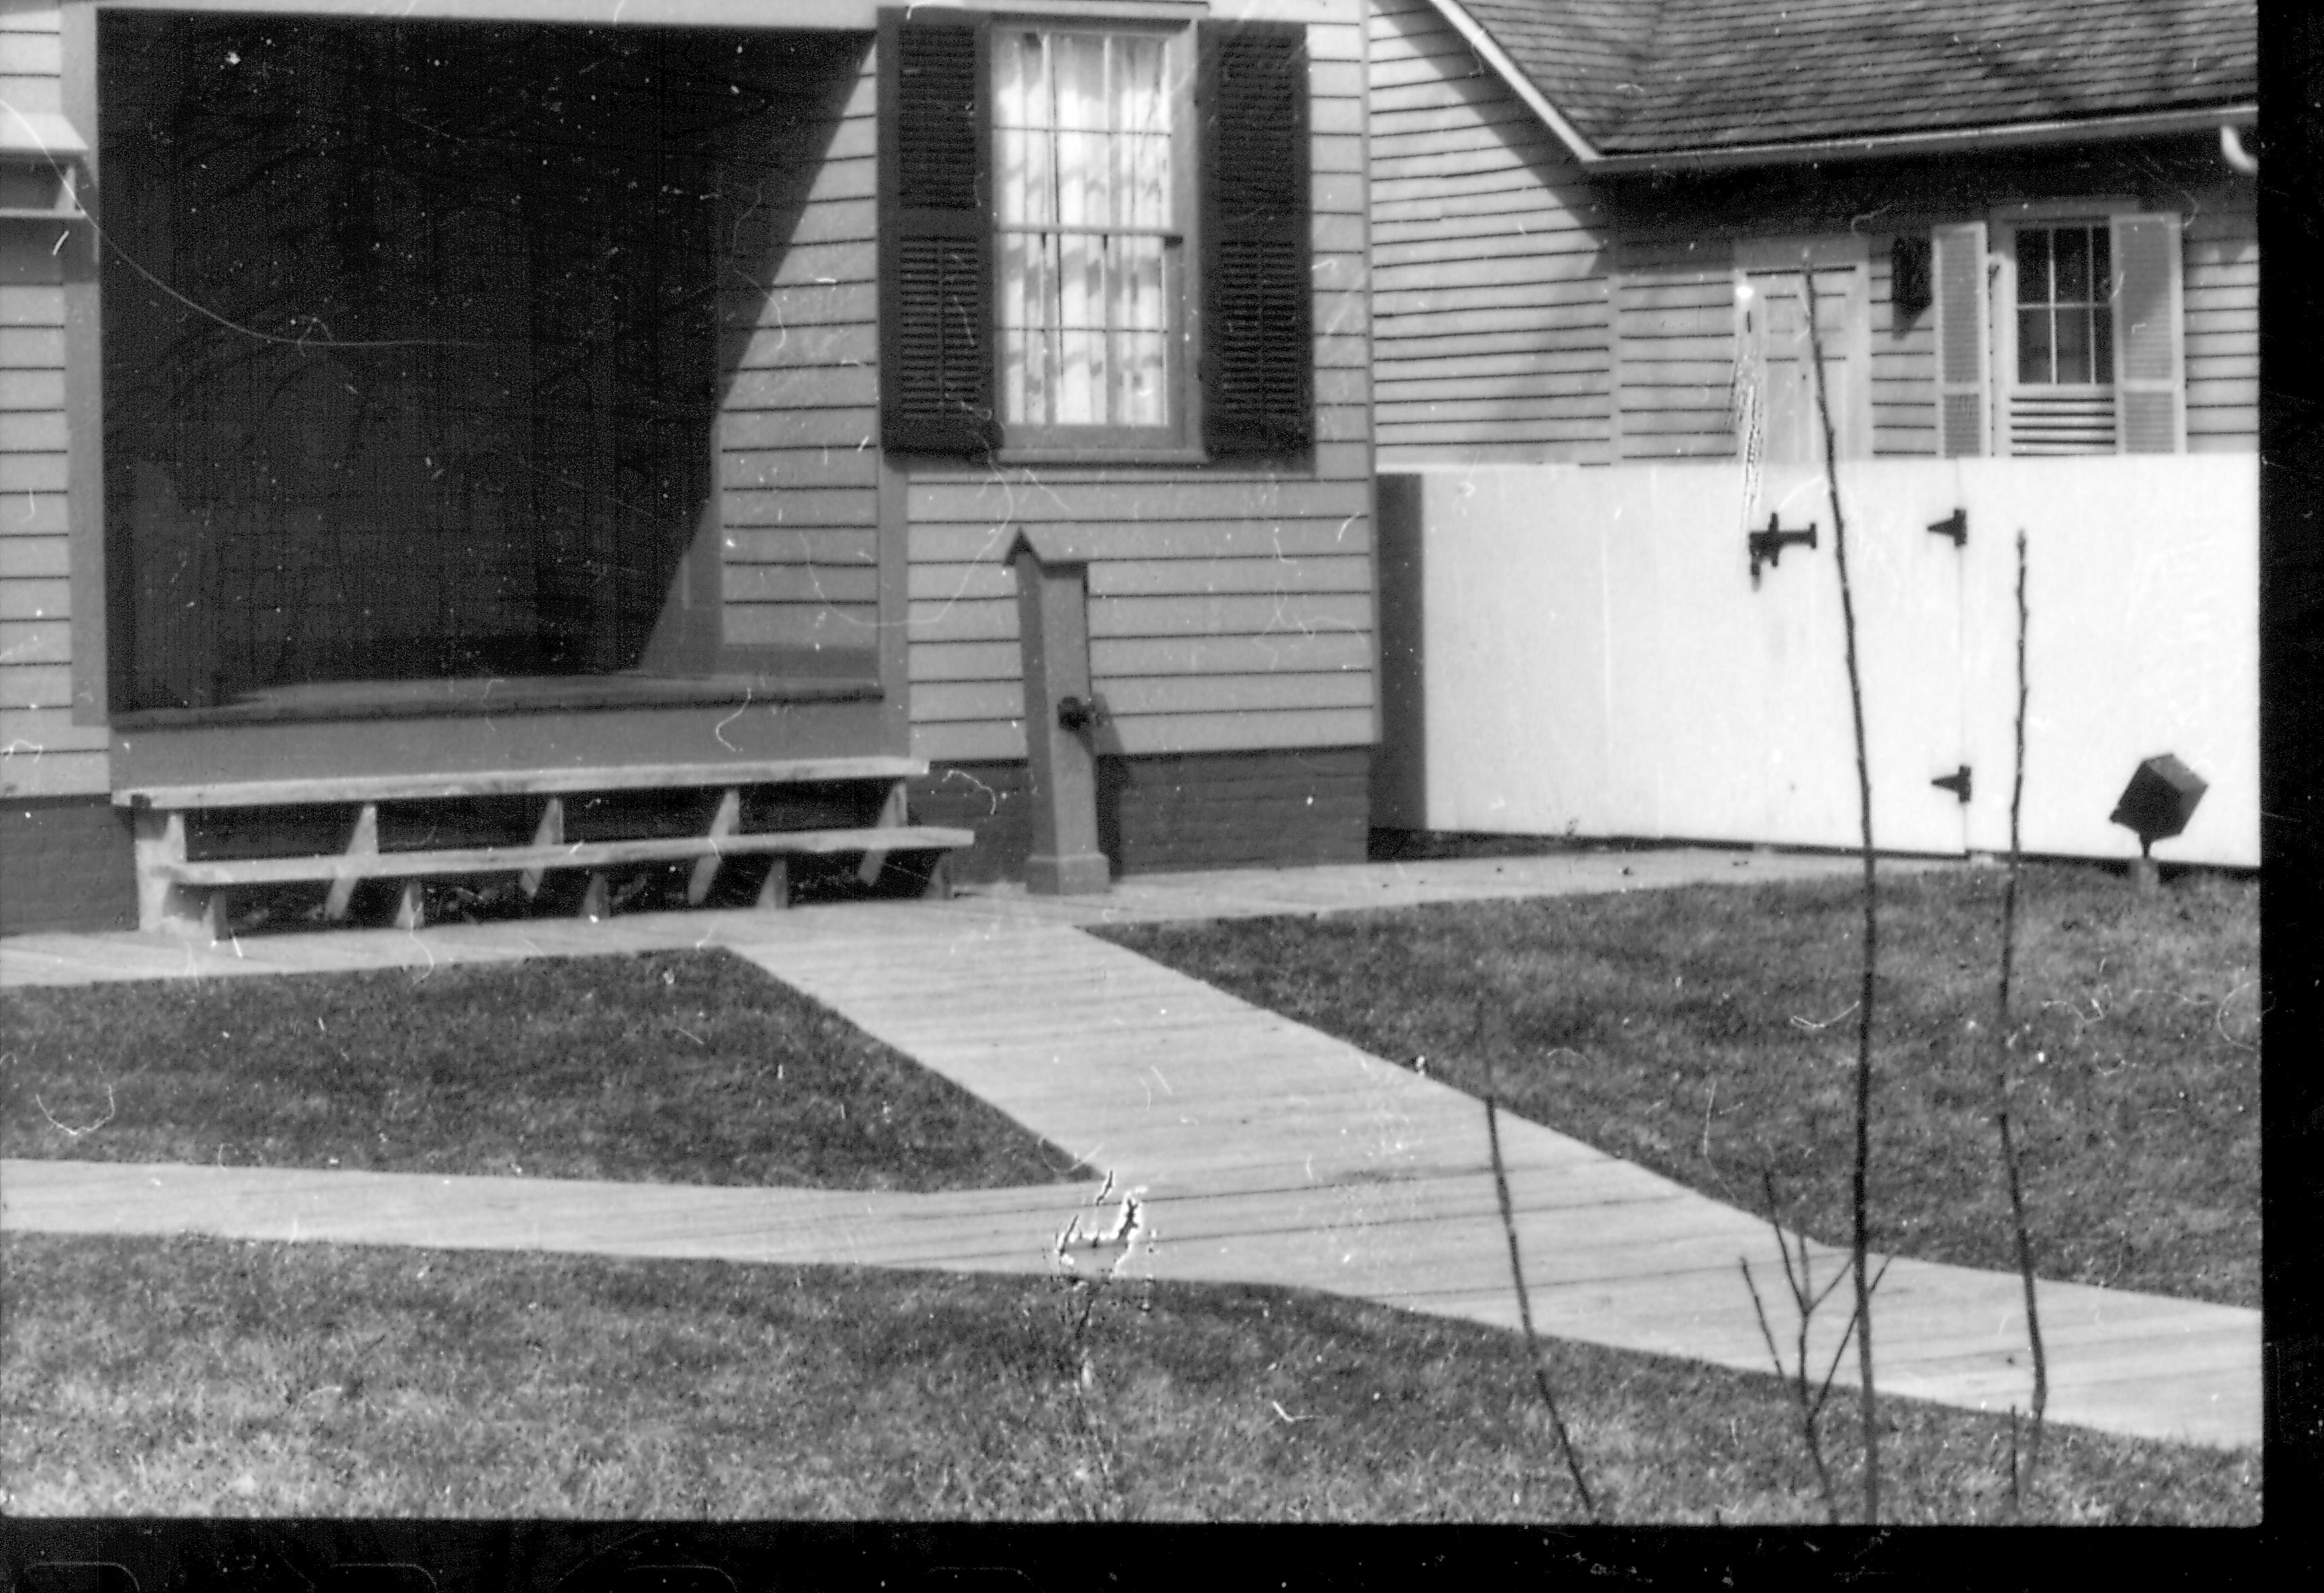 View of the East Porch and boardwalk of the Lincoln Home prior to the addition of the wheelchair lift. Corenau house in the background. Photographer facing north west.